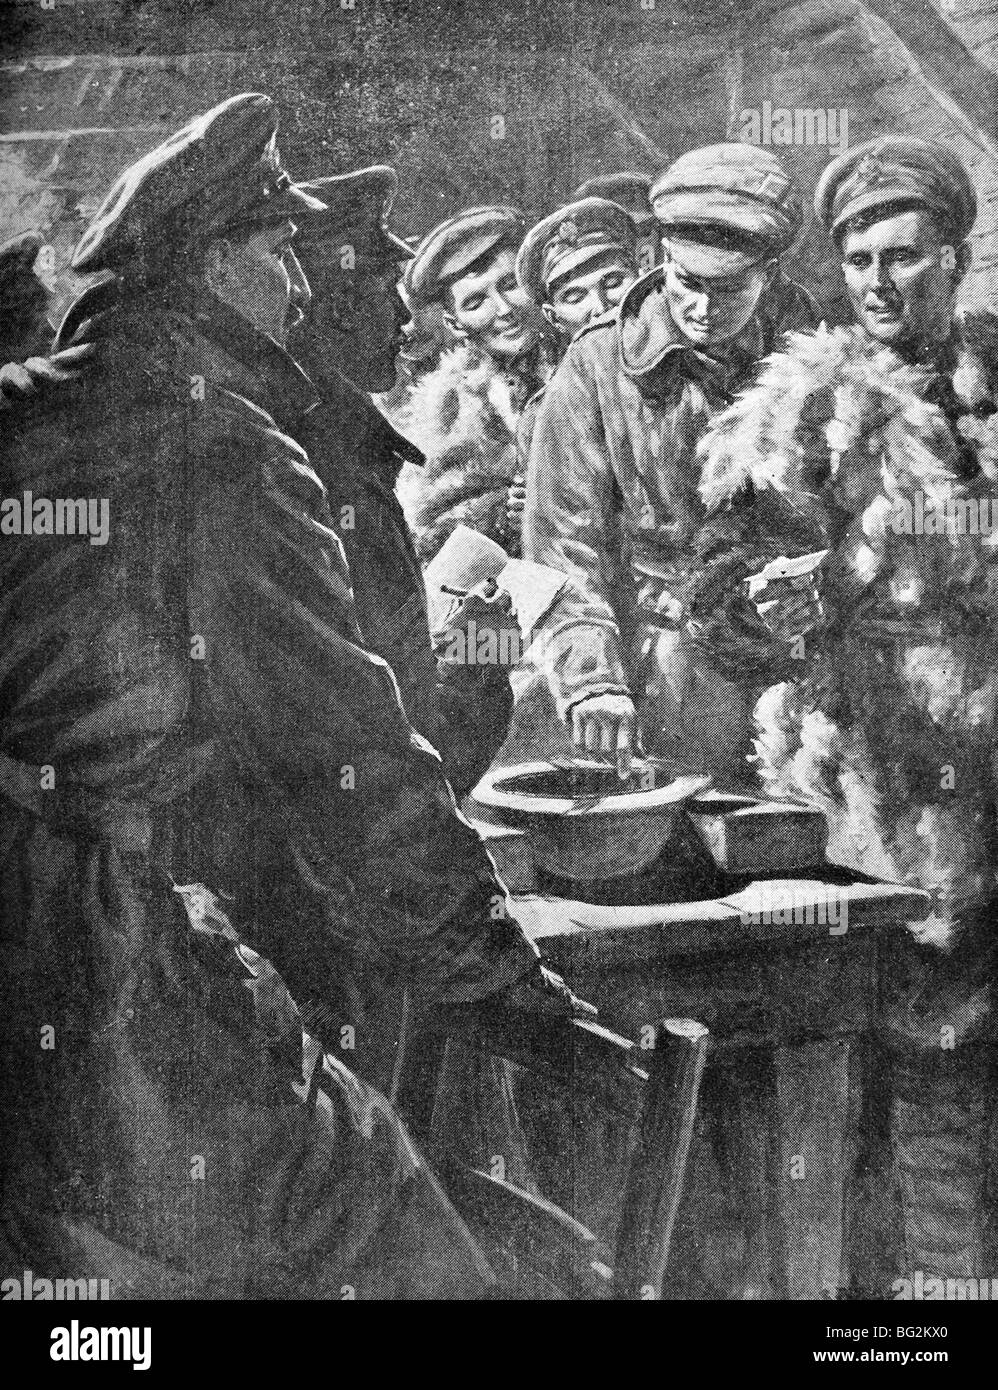 Contemporary WW1 illustration showing British troops drawing lots in France in 1916 to determine who gets 'leave' at Christmas. Stock Photo